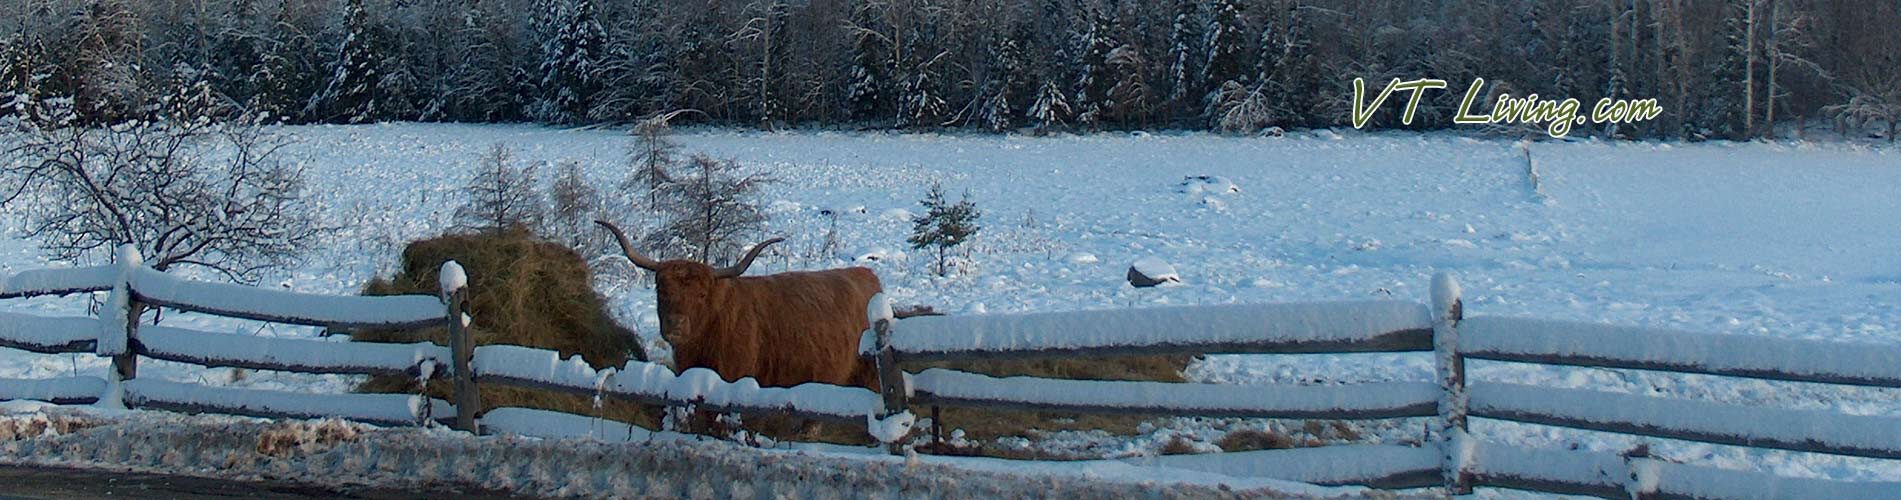 Vermont Autumn Vacations - A cow enjoys a late fall snow in Vermont.